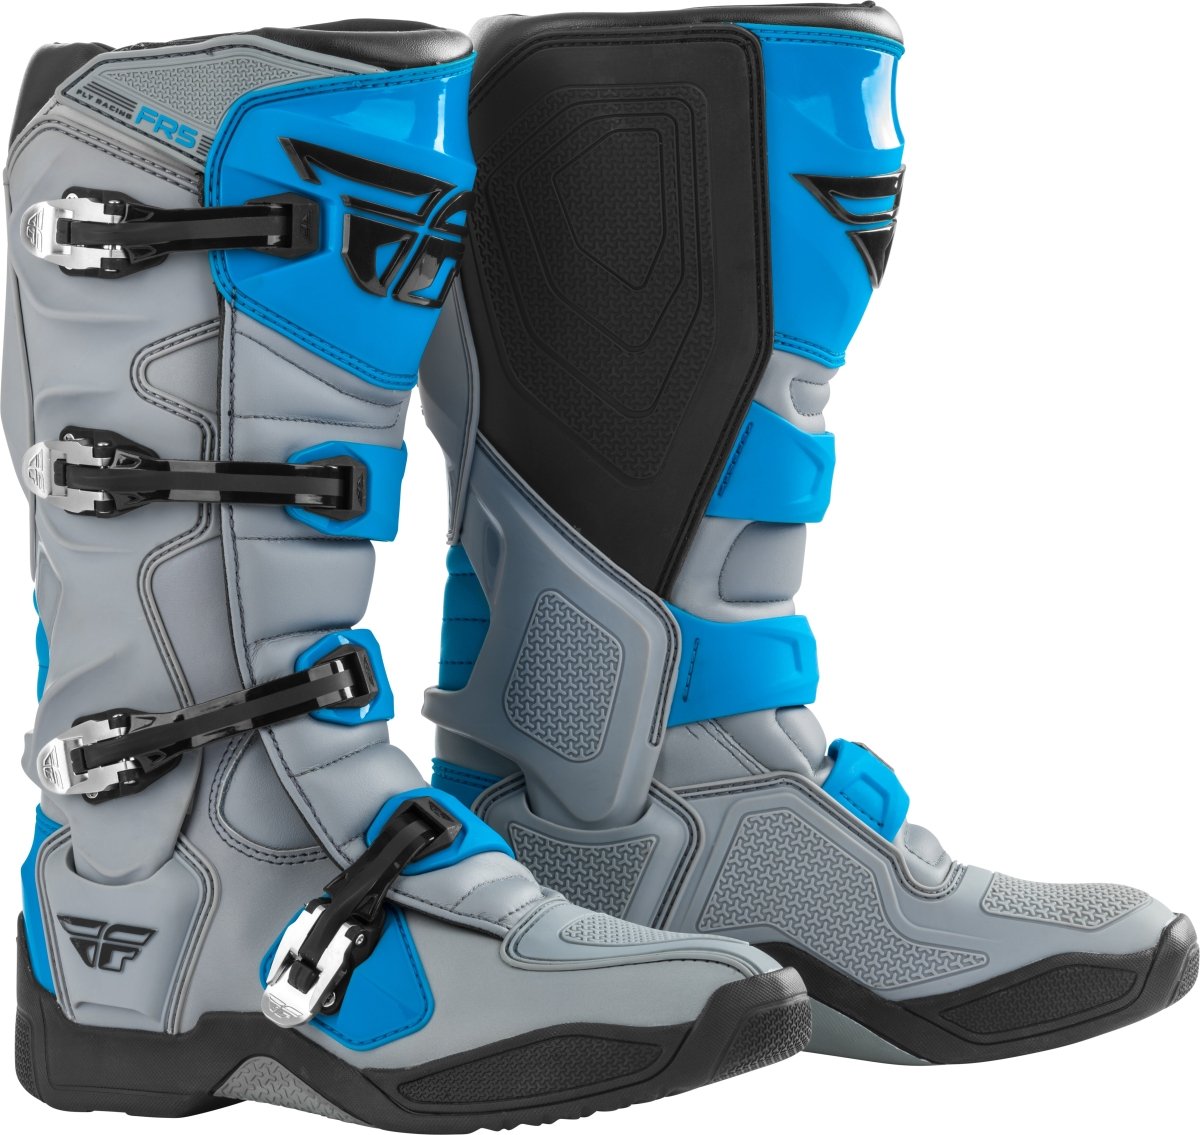 FLY RACING - FR5 BOOTS - 364-71107 - 191361239618